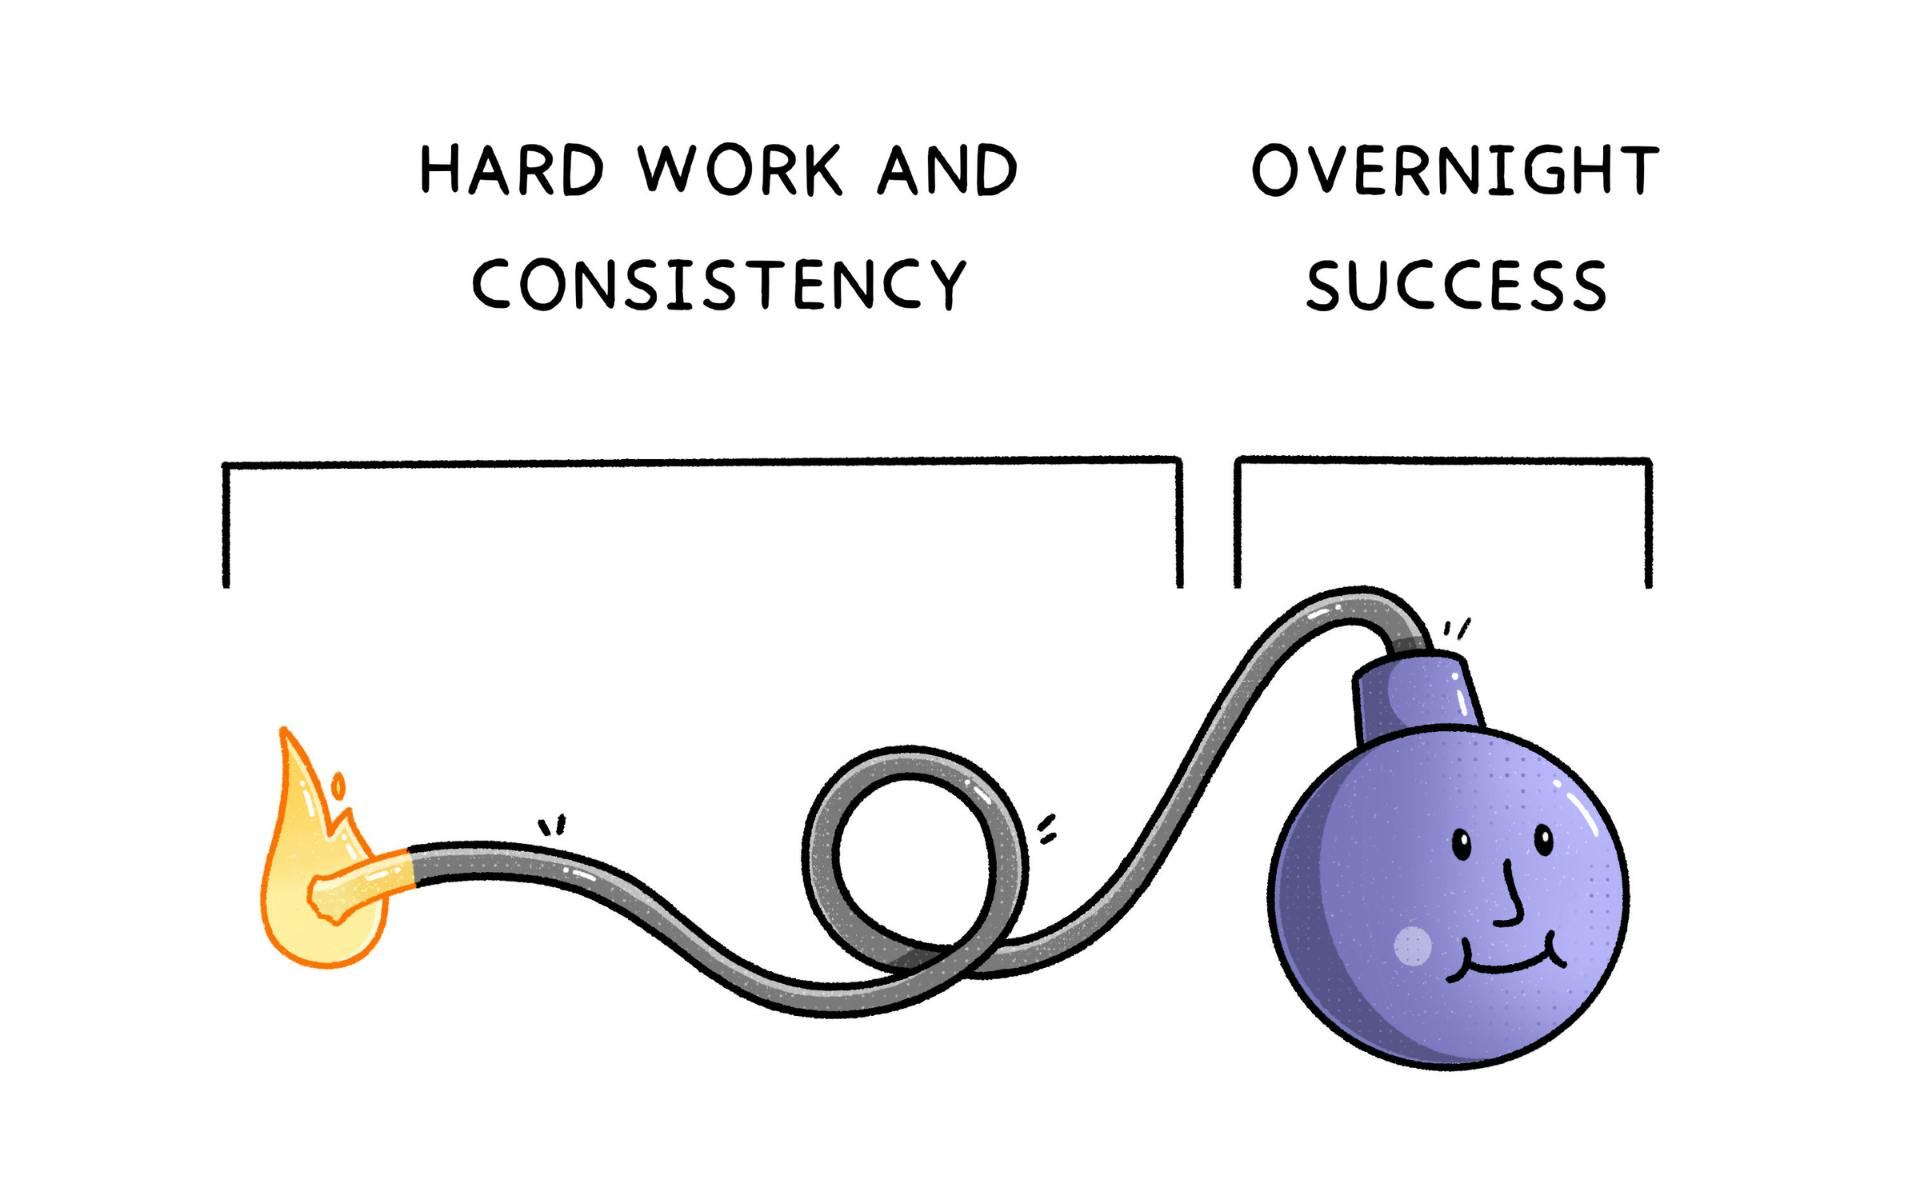 Hard work and consistency leads to overnight success, with illustration